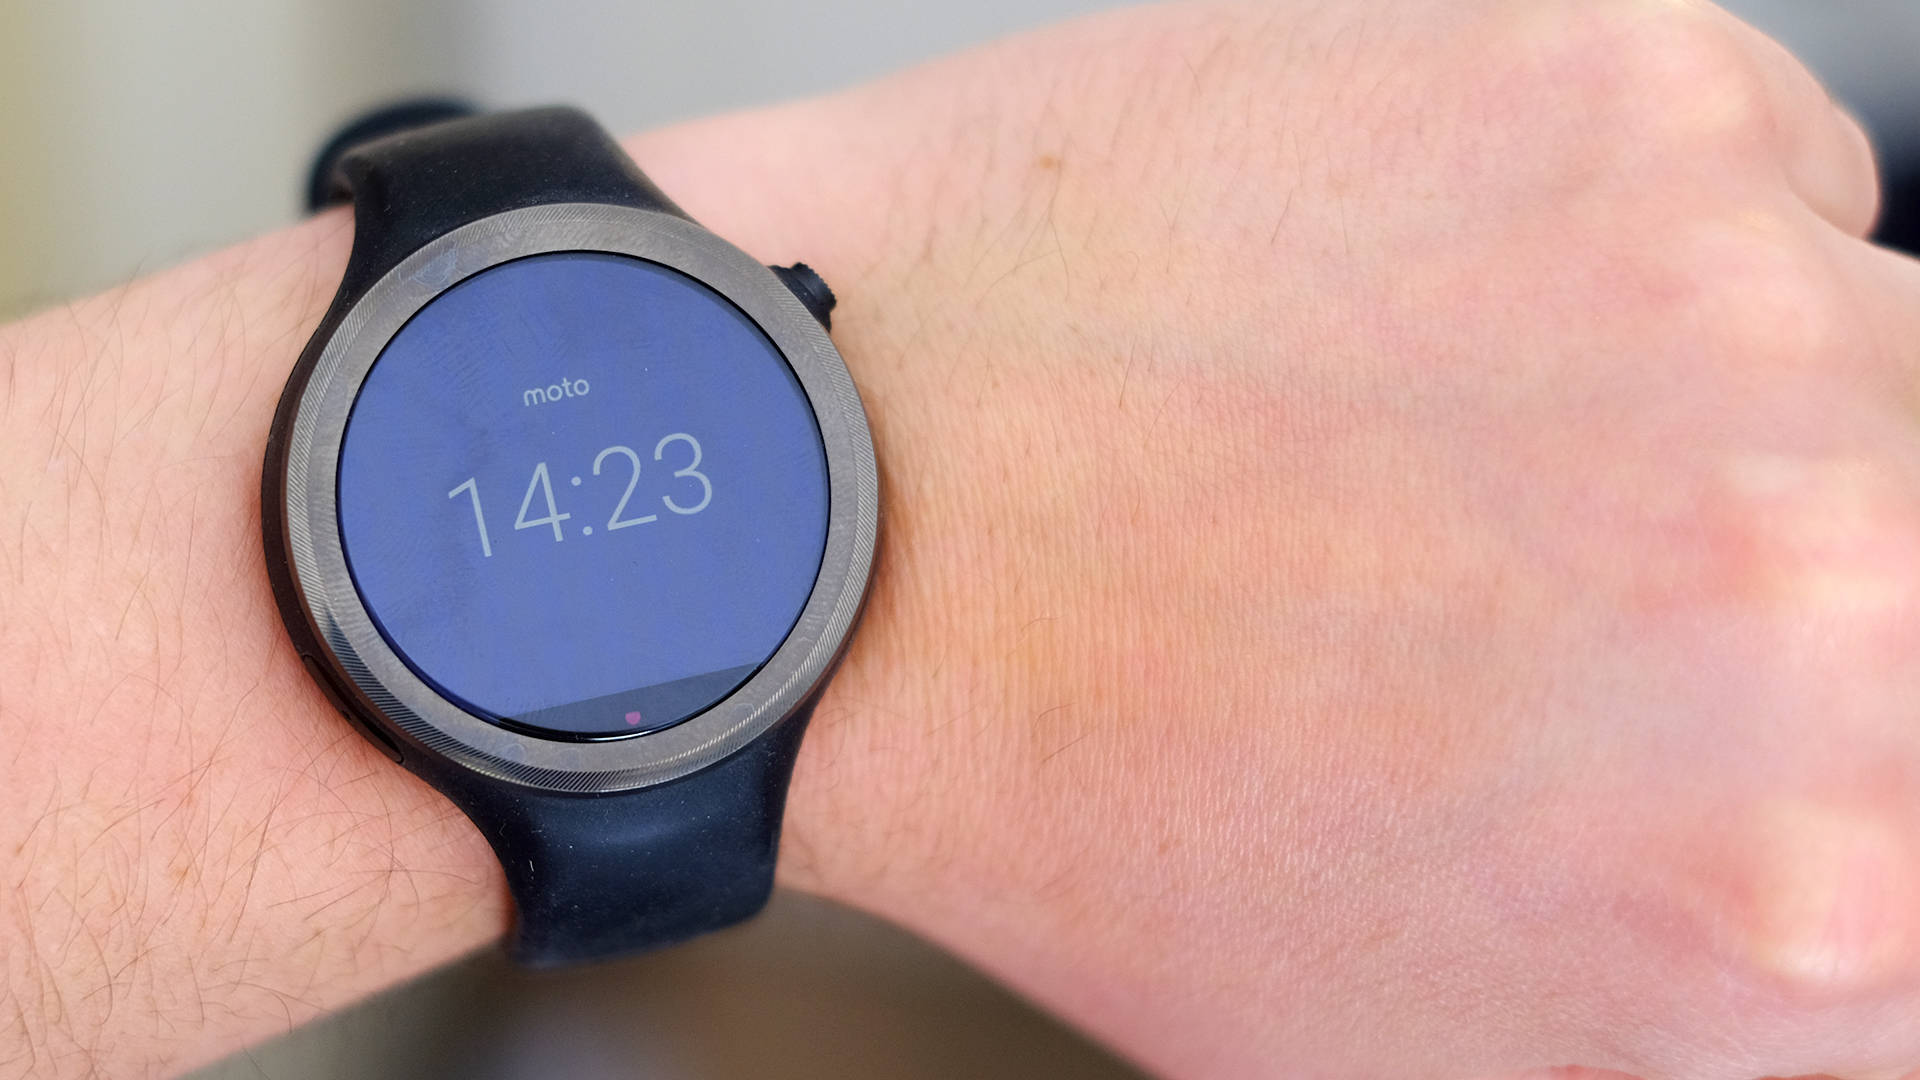 Moto Watch 100: A compelling smartwatch for less than $100 | ZDNET